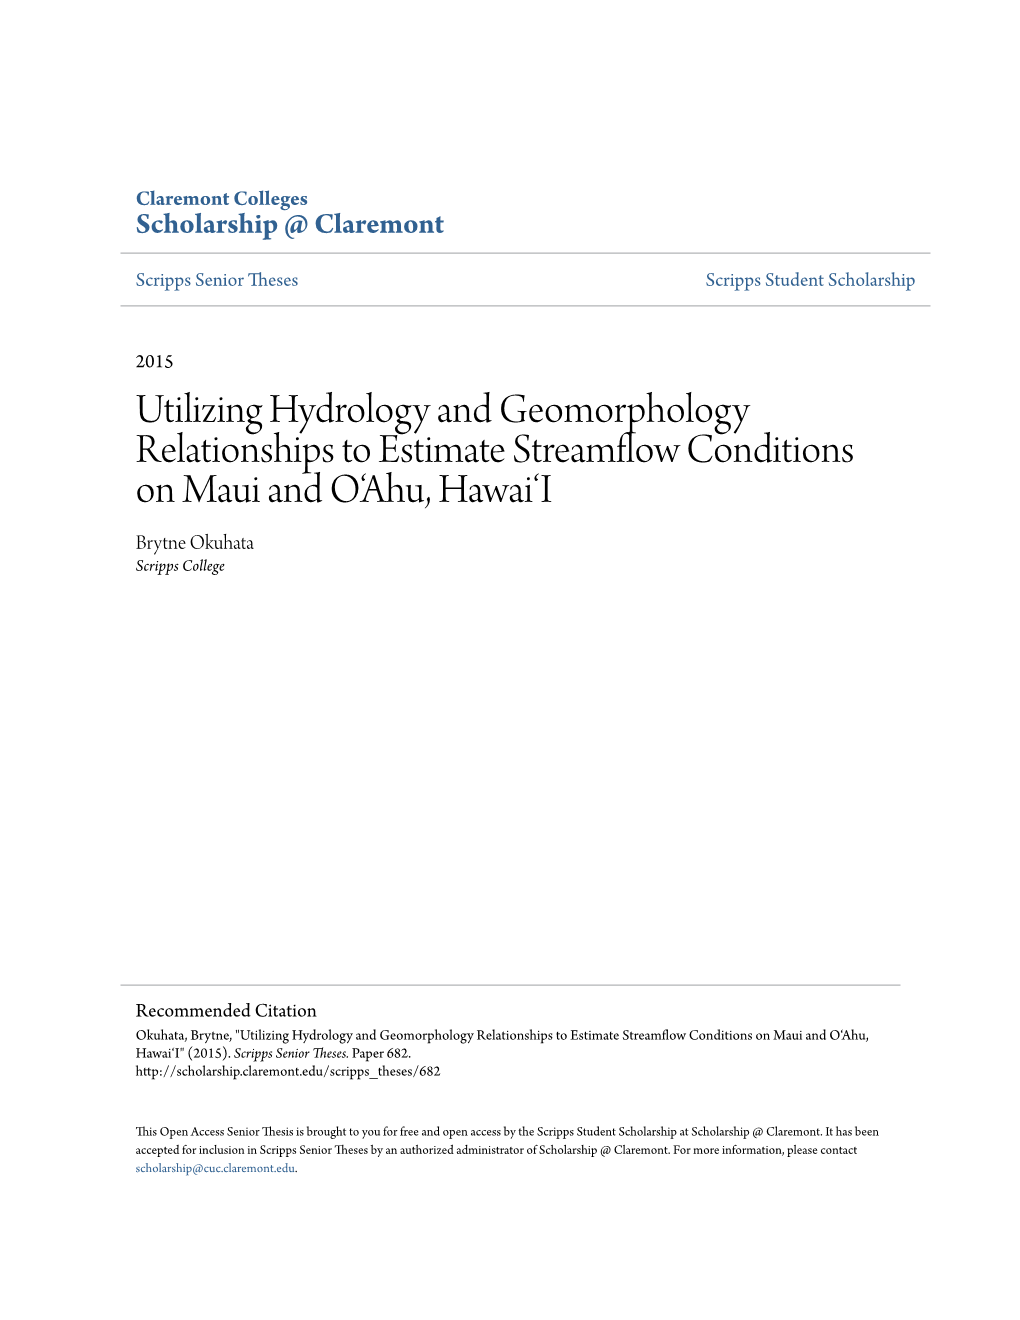 Utilizing Hydrology and Geomorphology Relationships to Estimate Streamflow Conditions on Maui and O‘Ahu, Hawai‘I Brytne Okuhata Scripps College